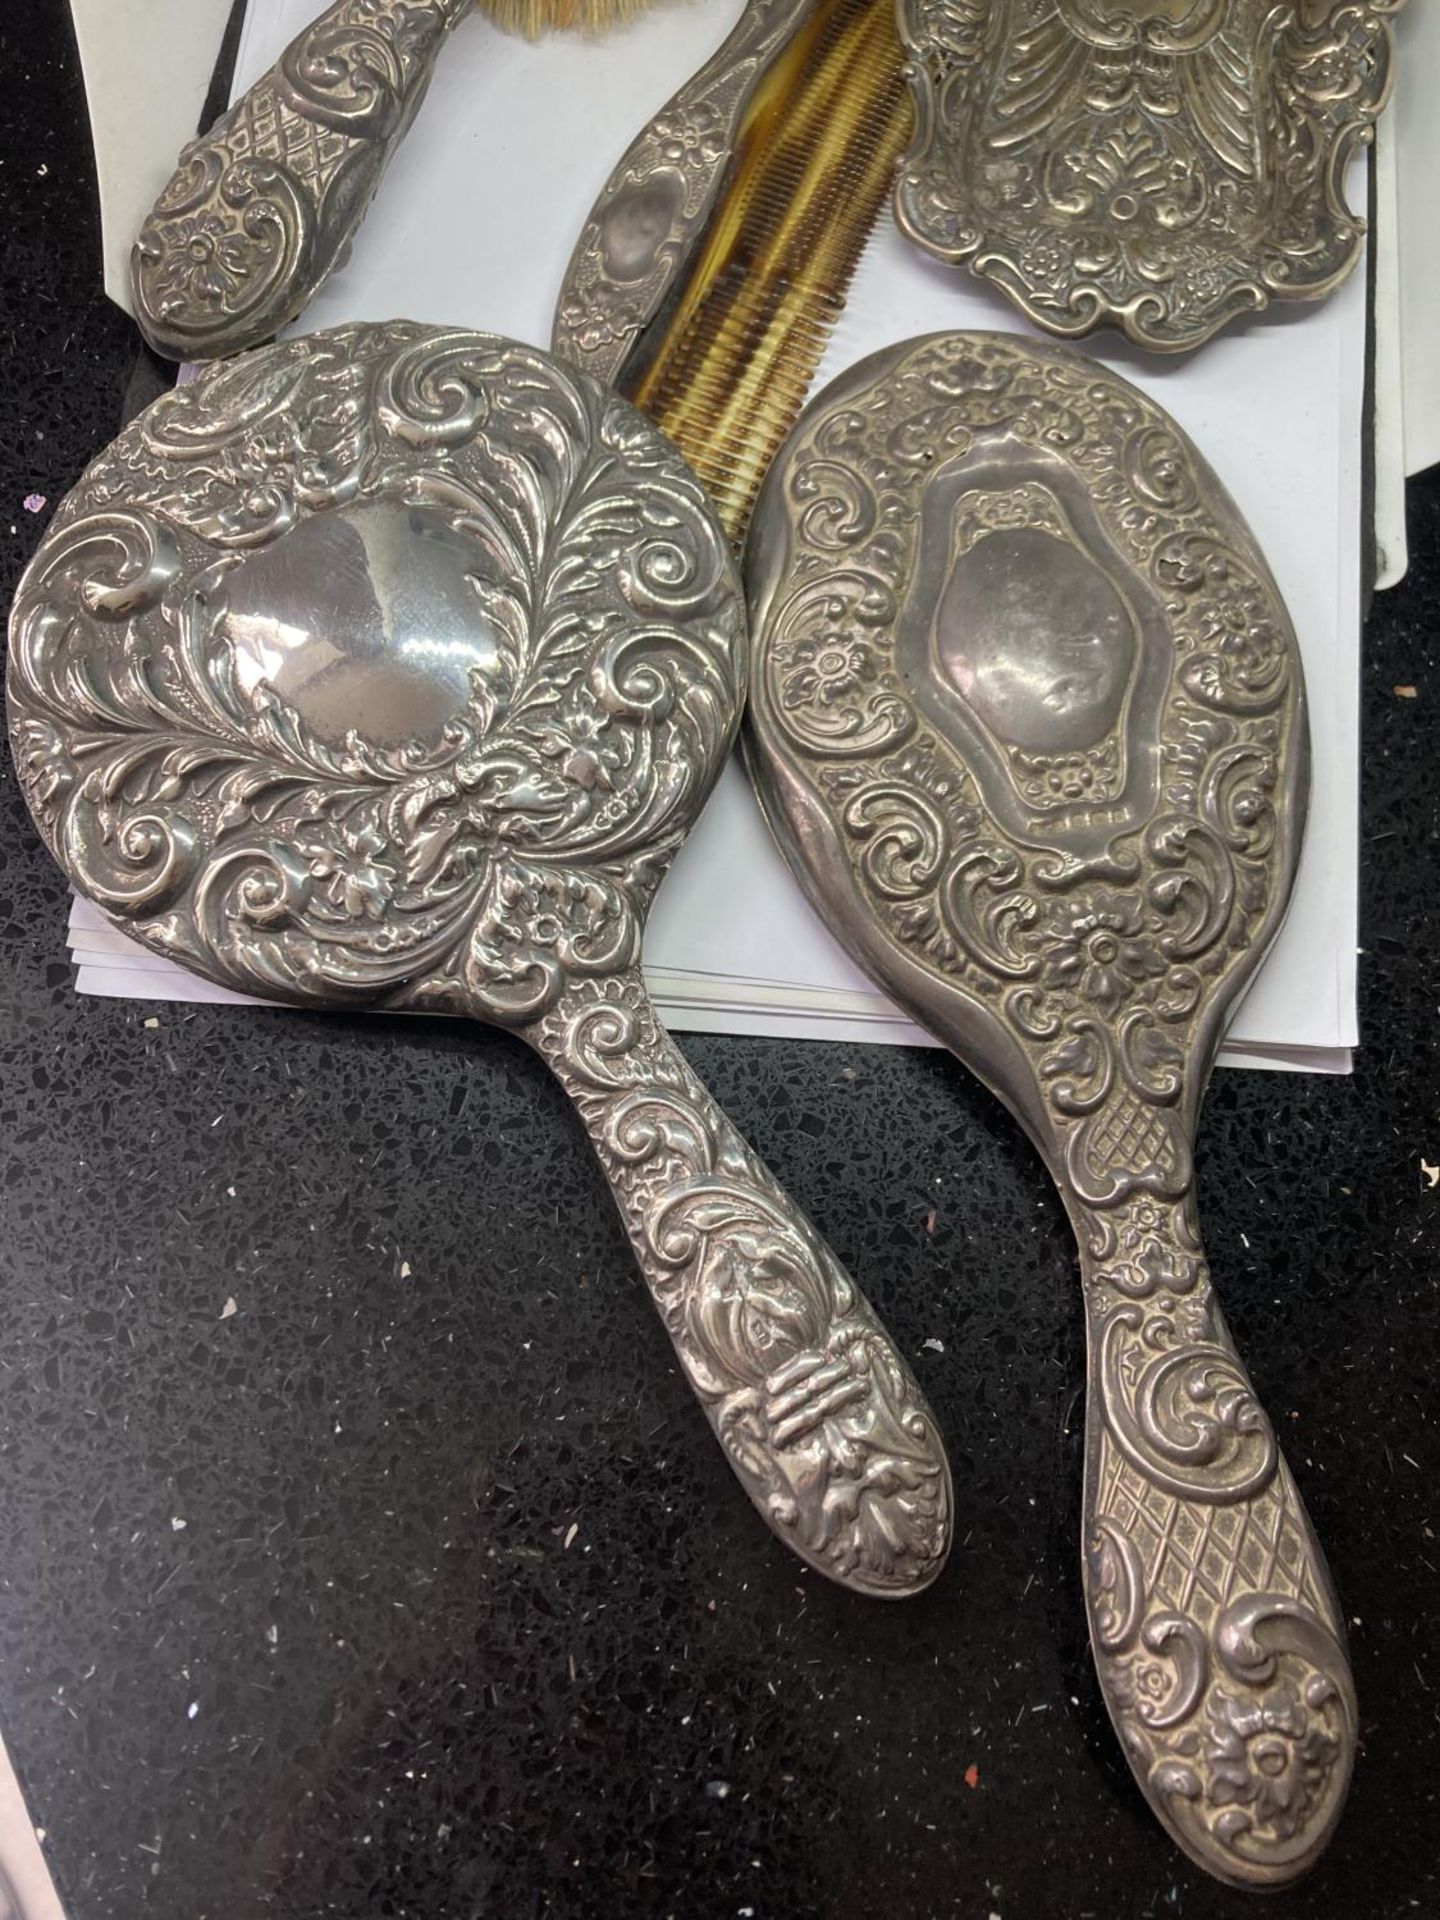 FIVE PIECES OF HALLMARKED BIRMINGHAM SILVER TO INCLUDE A BRUSH, TWO MIRRORS, A COMB AND A TRAY - Image 4 of 4